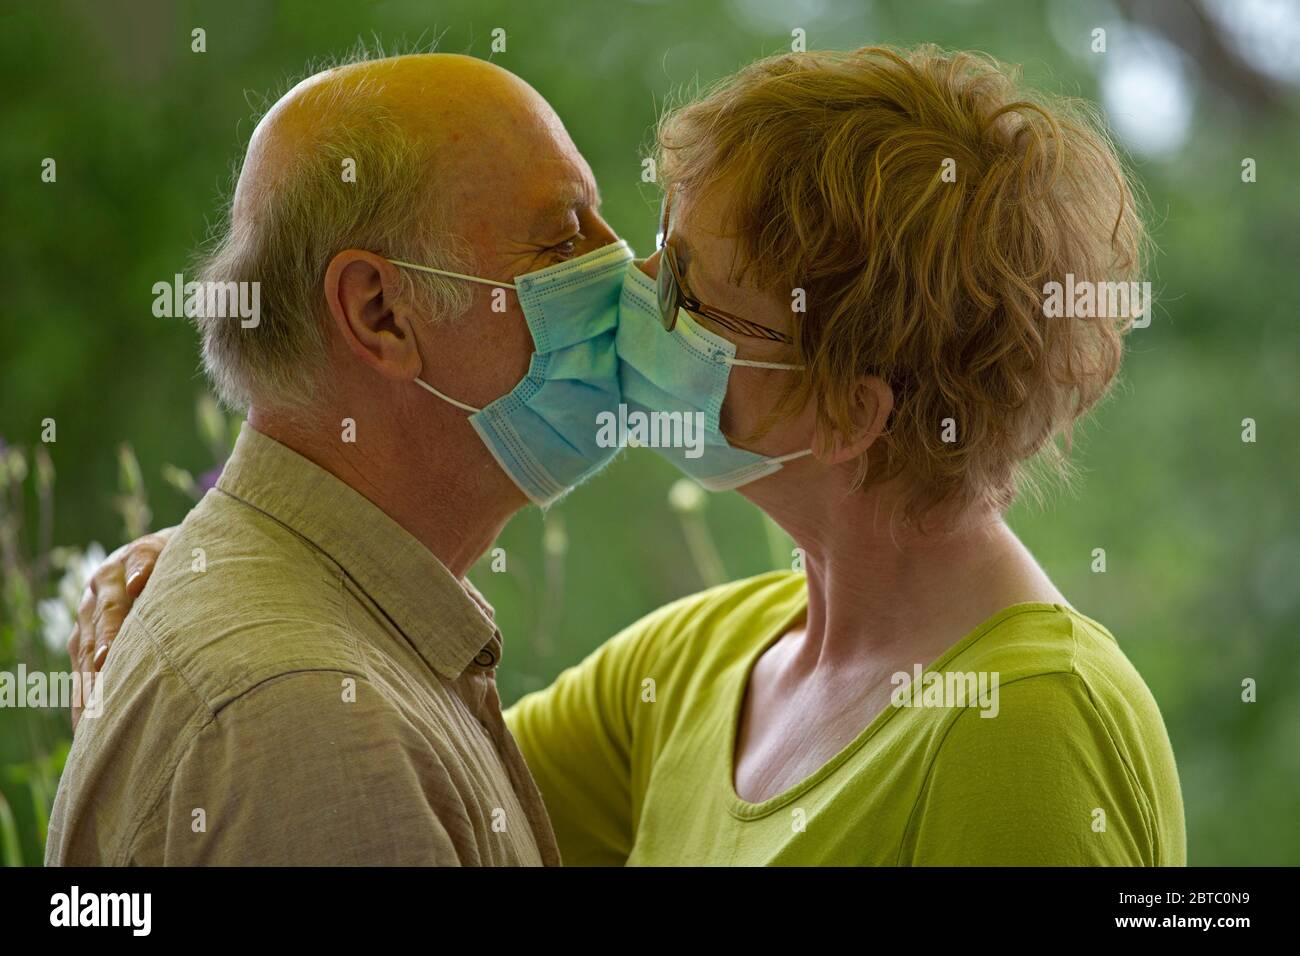 kissing in times of Corona, Germany Stock Photo